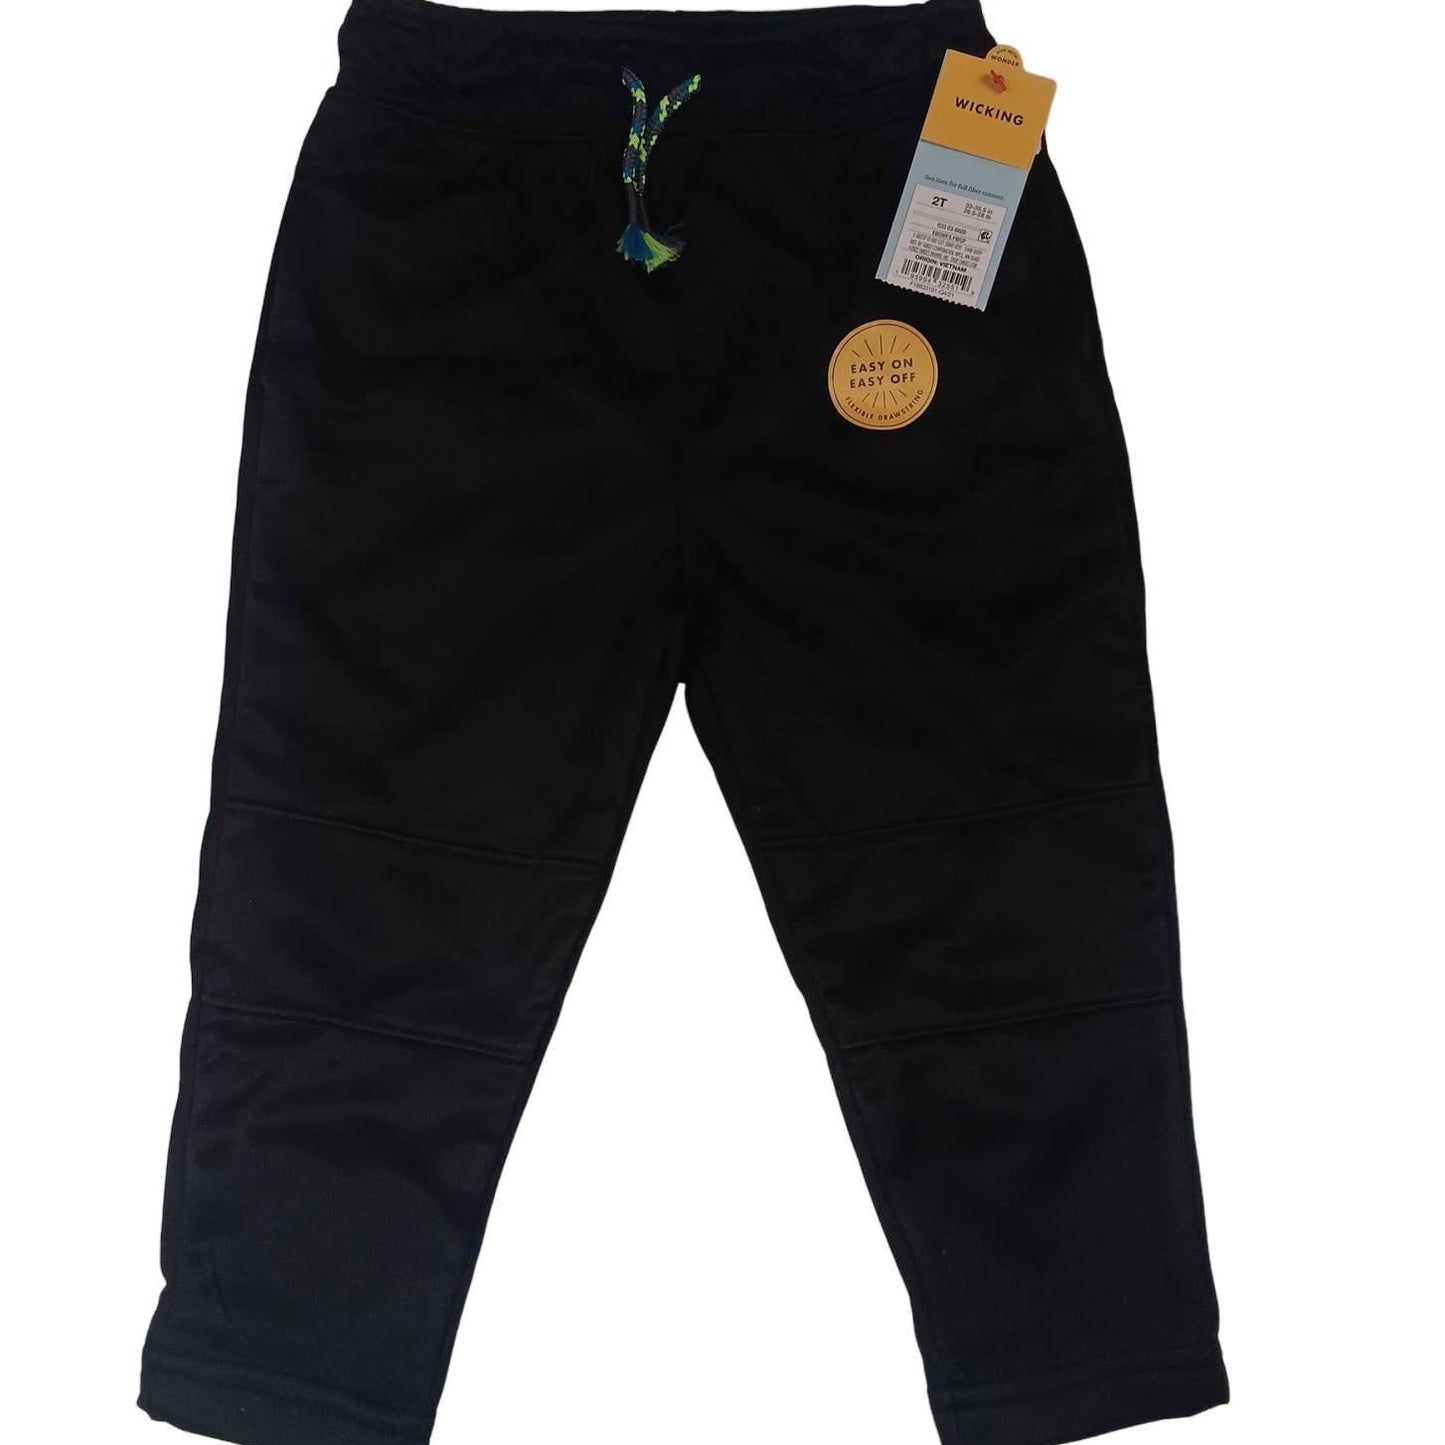 Toddler (2T) Boys' Tapered Pull-On Pants - Cat & Jack Black 2T + Free Shipping